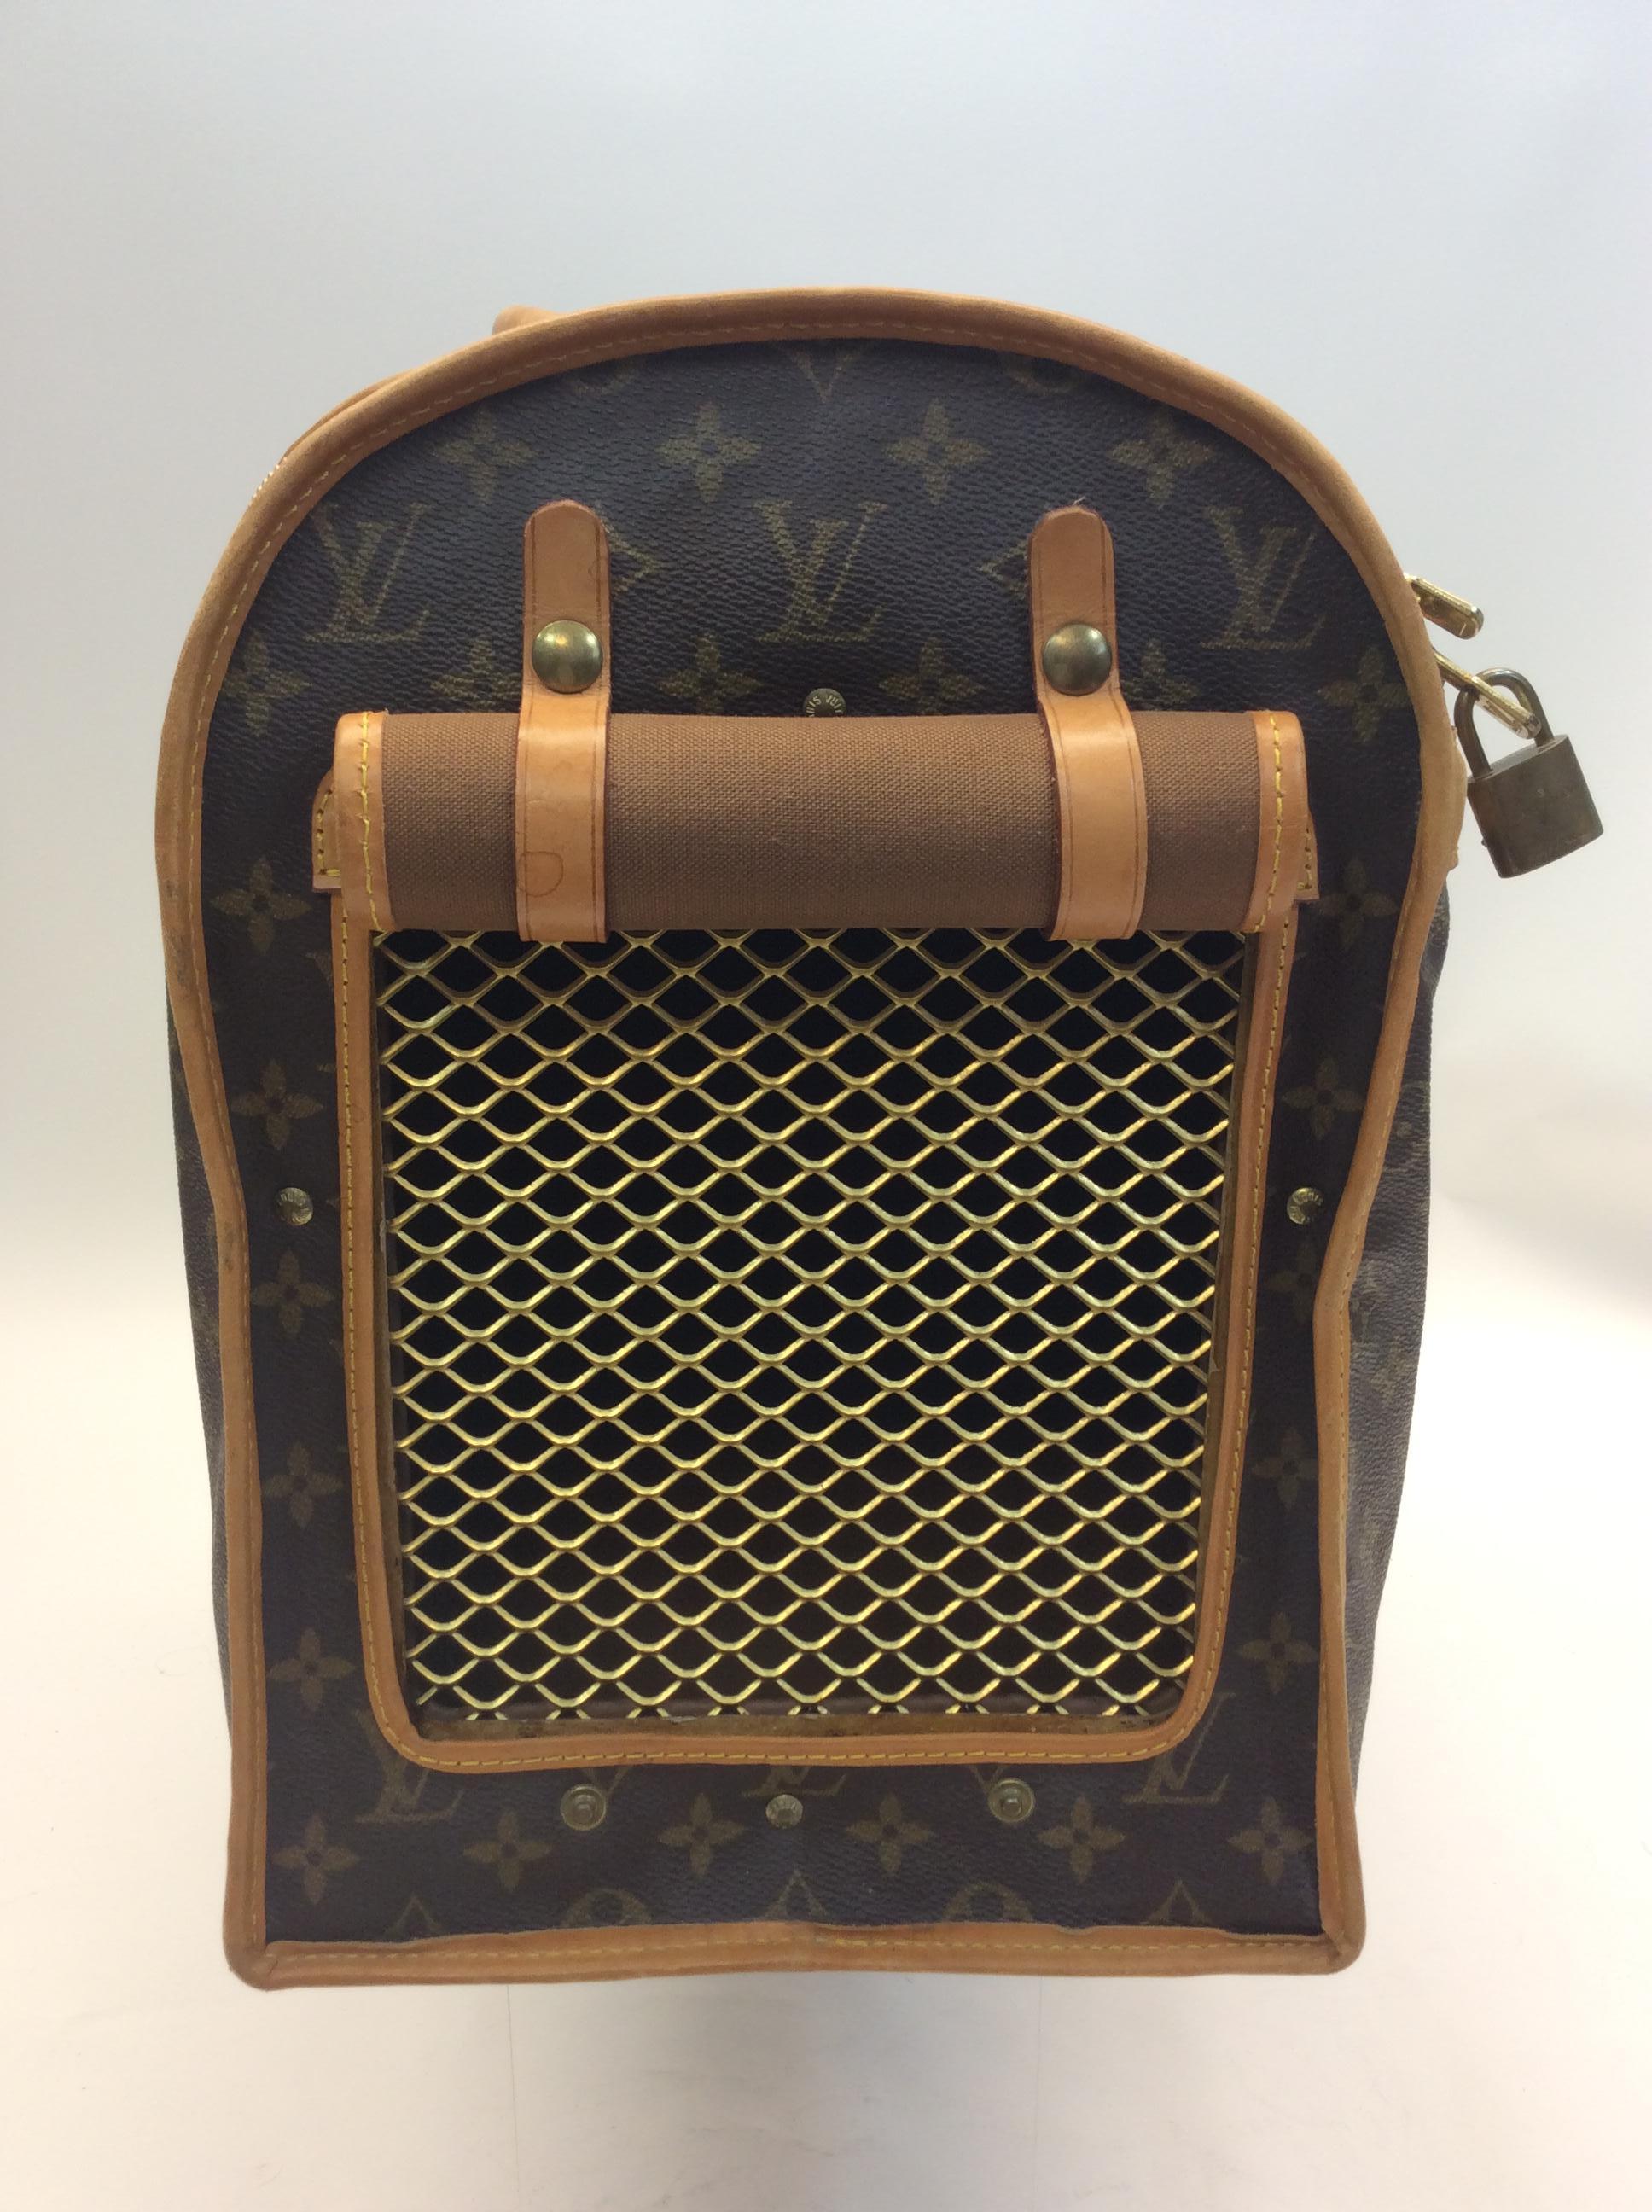 Louis Vuitton Vintage Monogram Leather Dog Carrier
$1300
Made in France
Leather
19.5